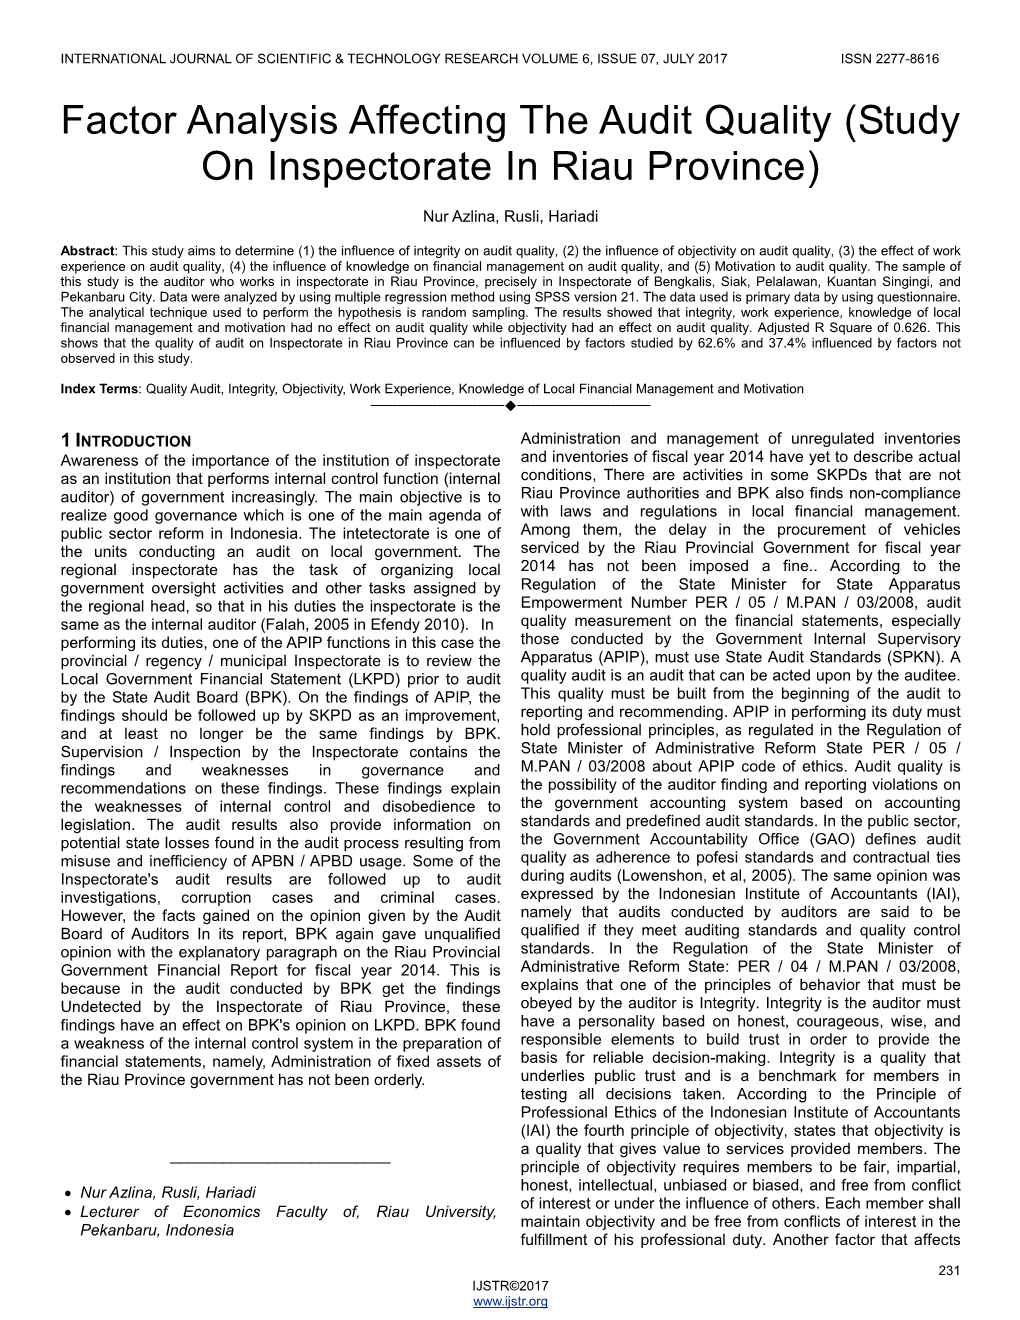 Factor Analysis Affecting the Audit Quality (Study on Inspectorate in Riau Province)